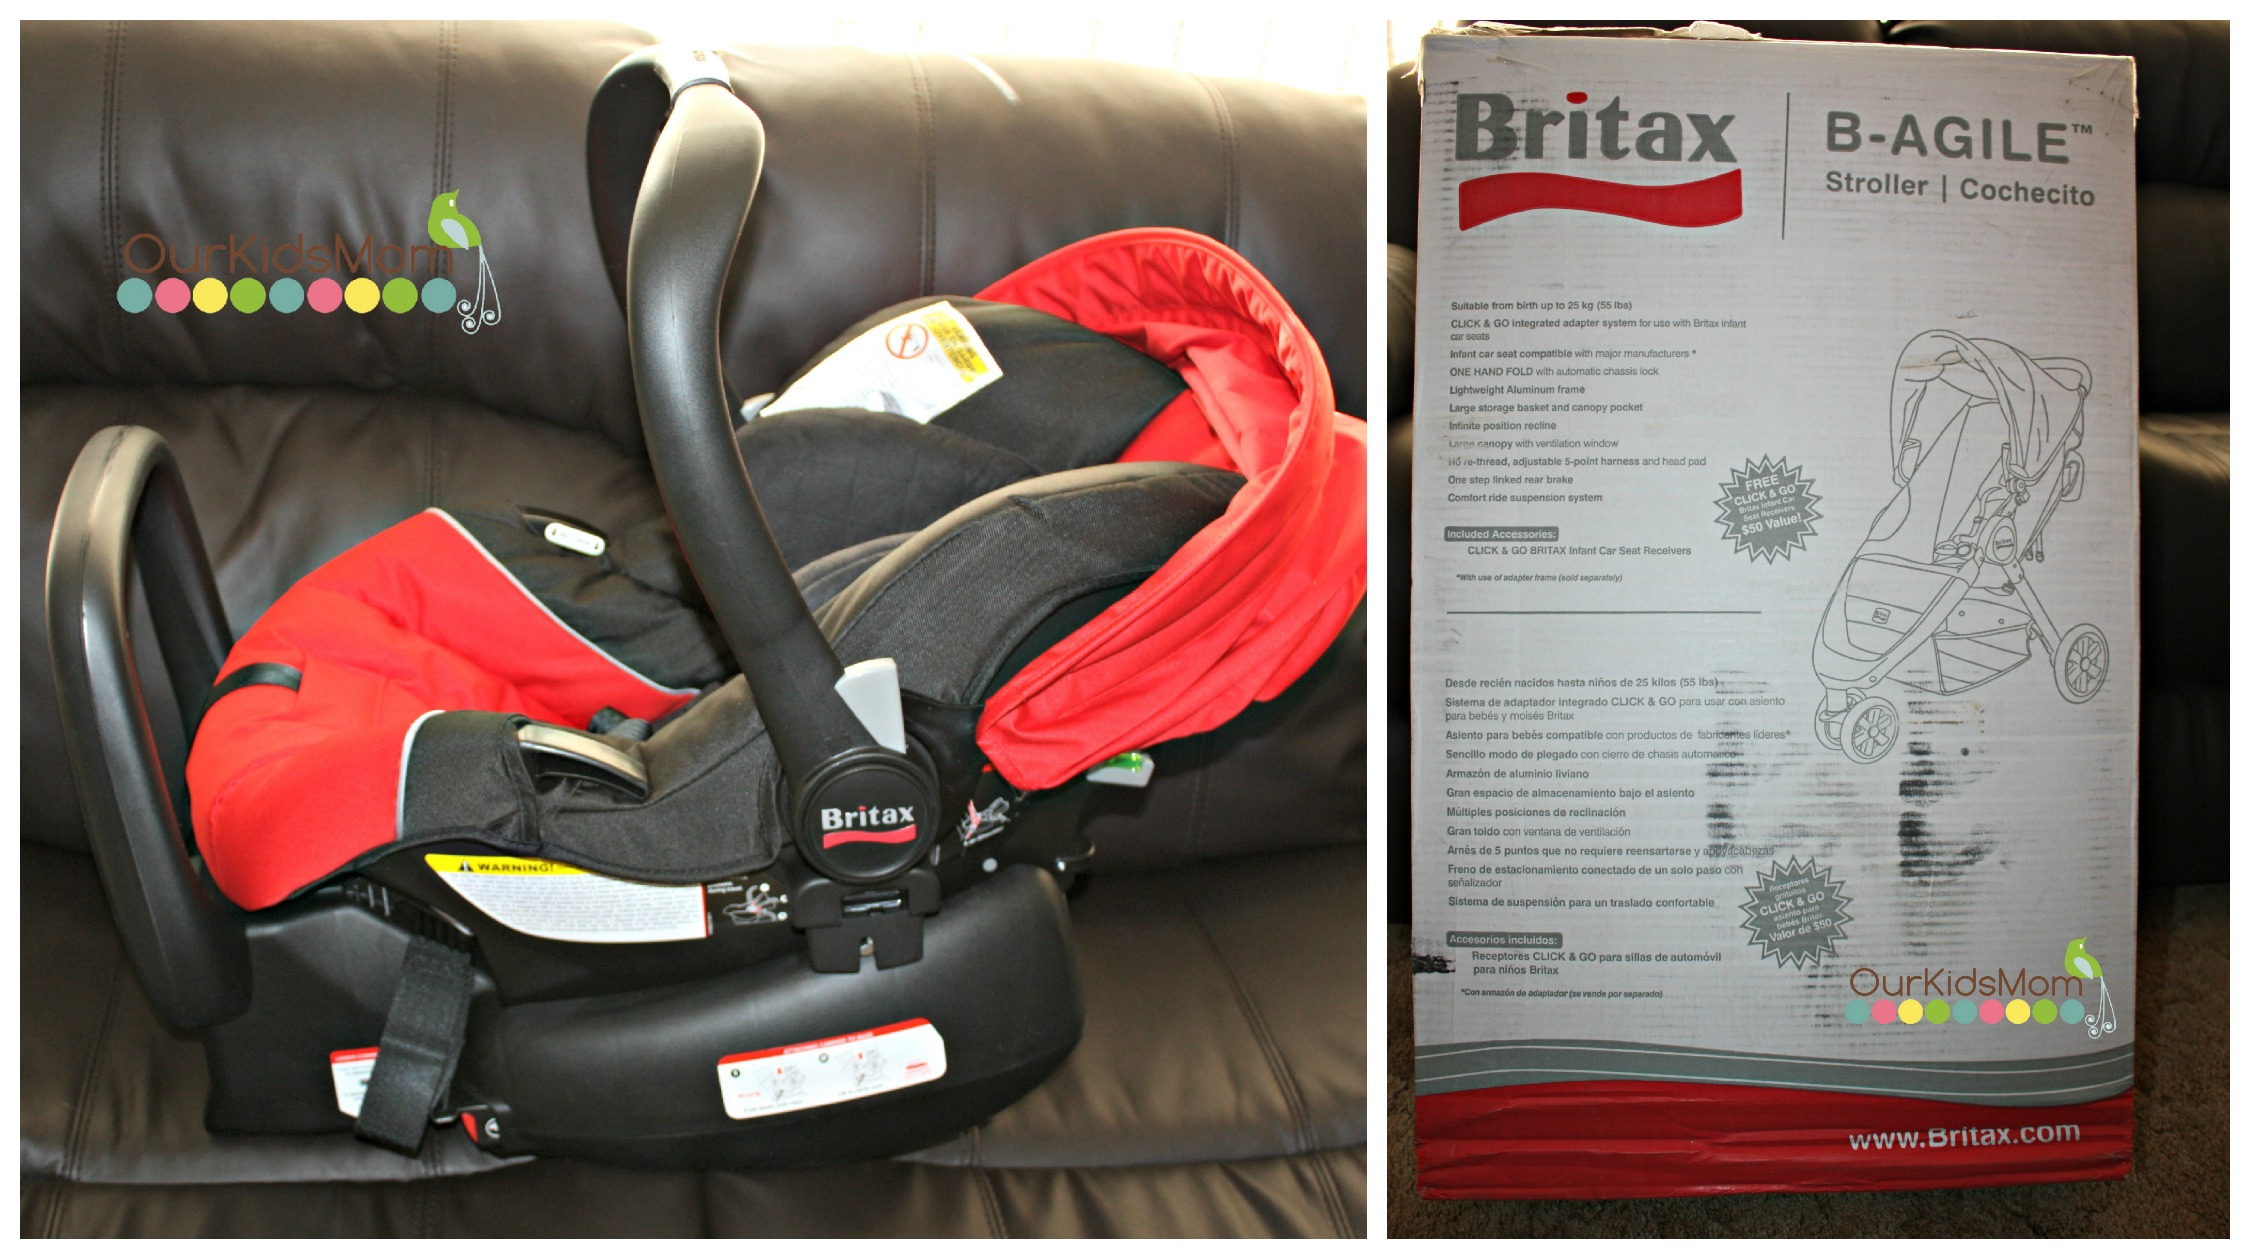 Britax B-Agile Stroller and Chaperone Infant Car Seat